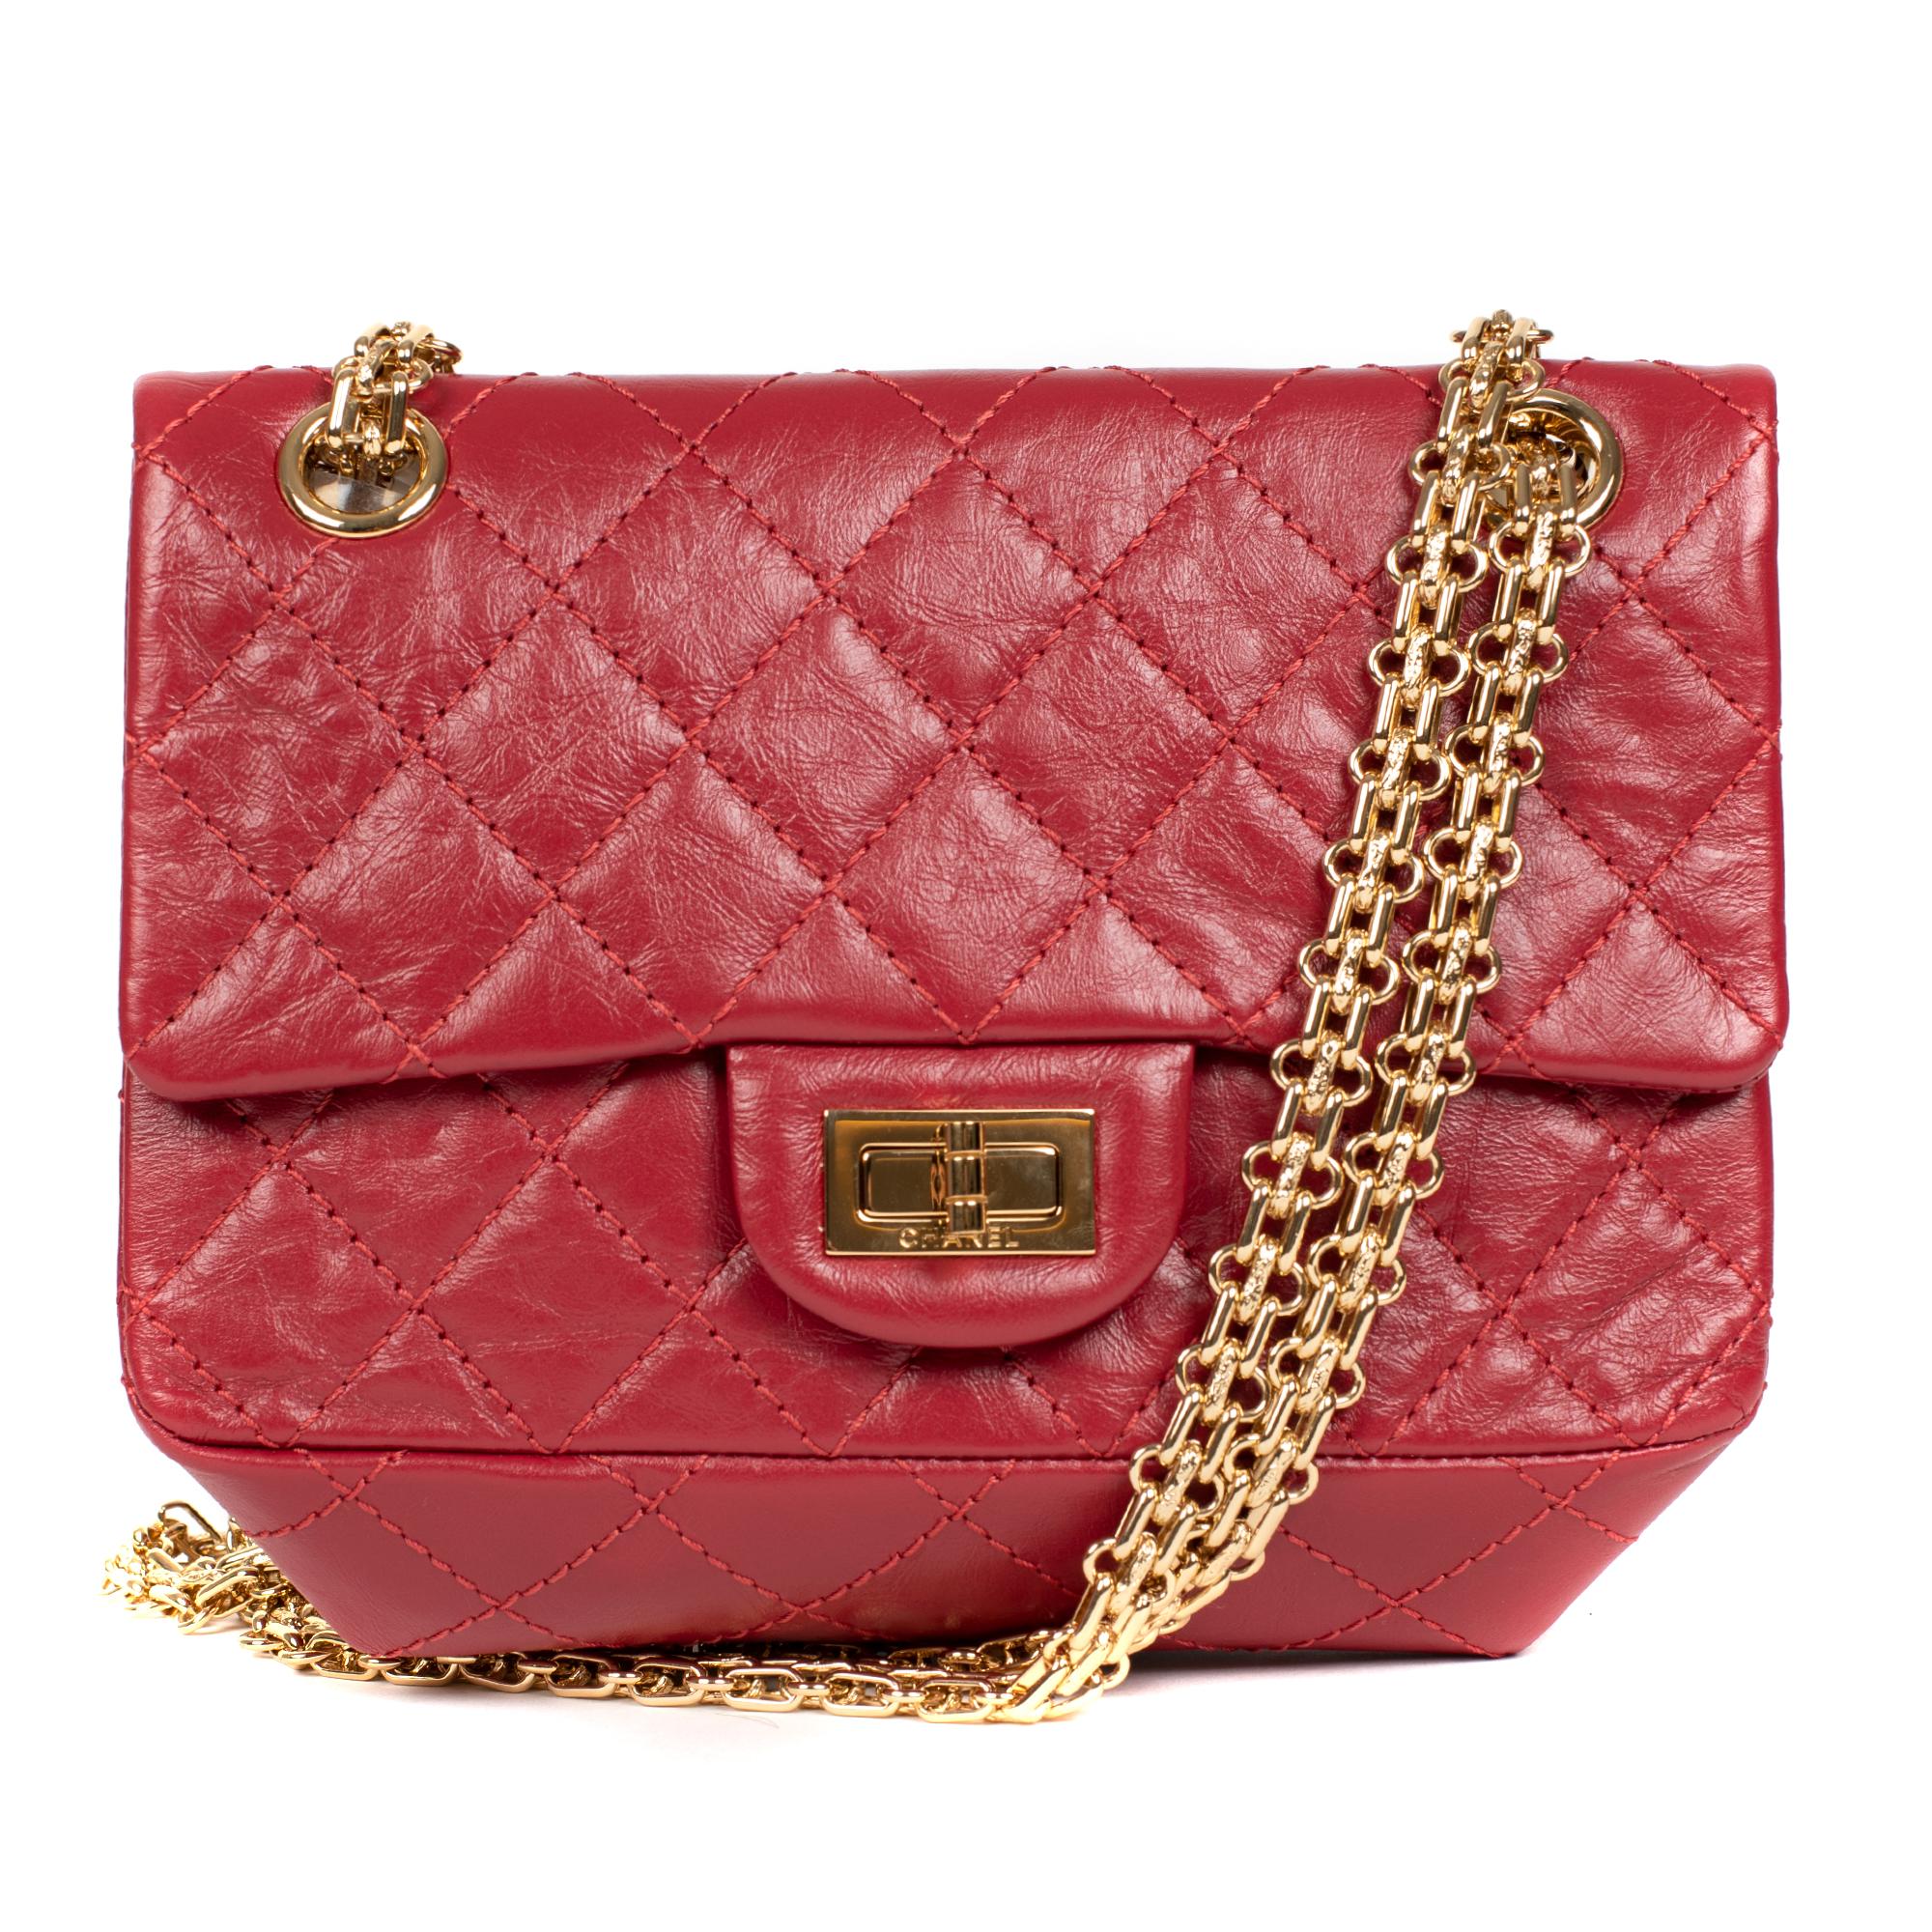 Pink Rare Mini Chanel 2.55 Reissue handbag in red quilted leather, gold hardware